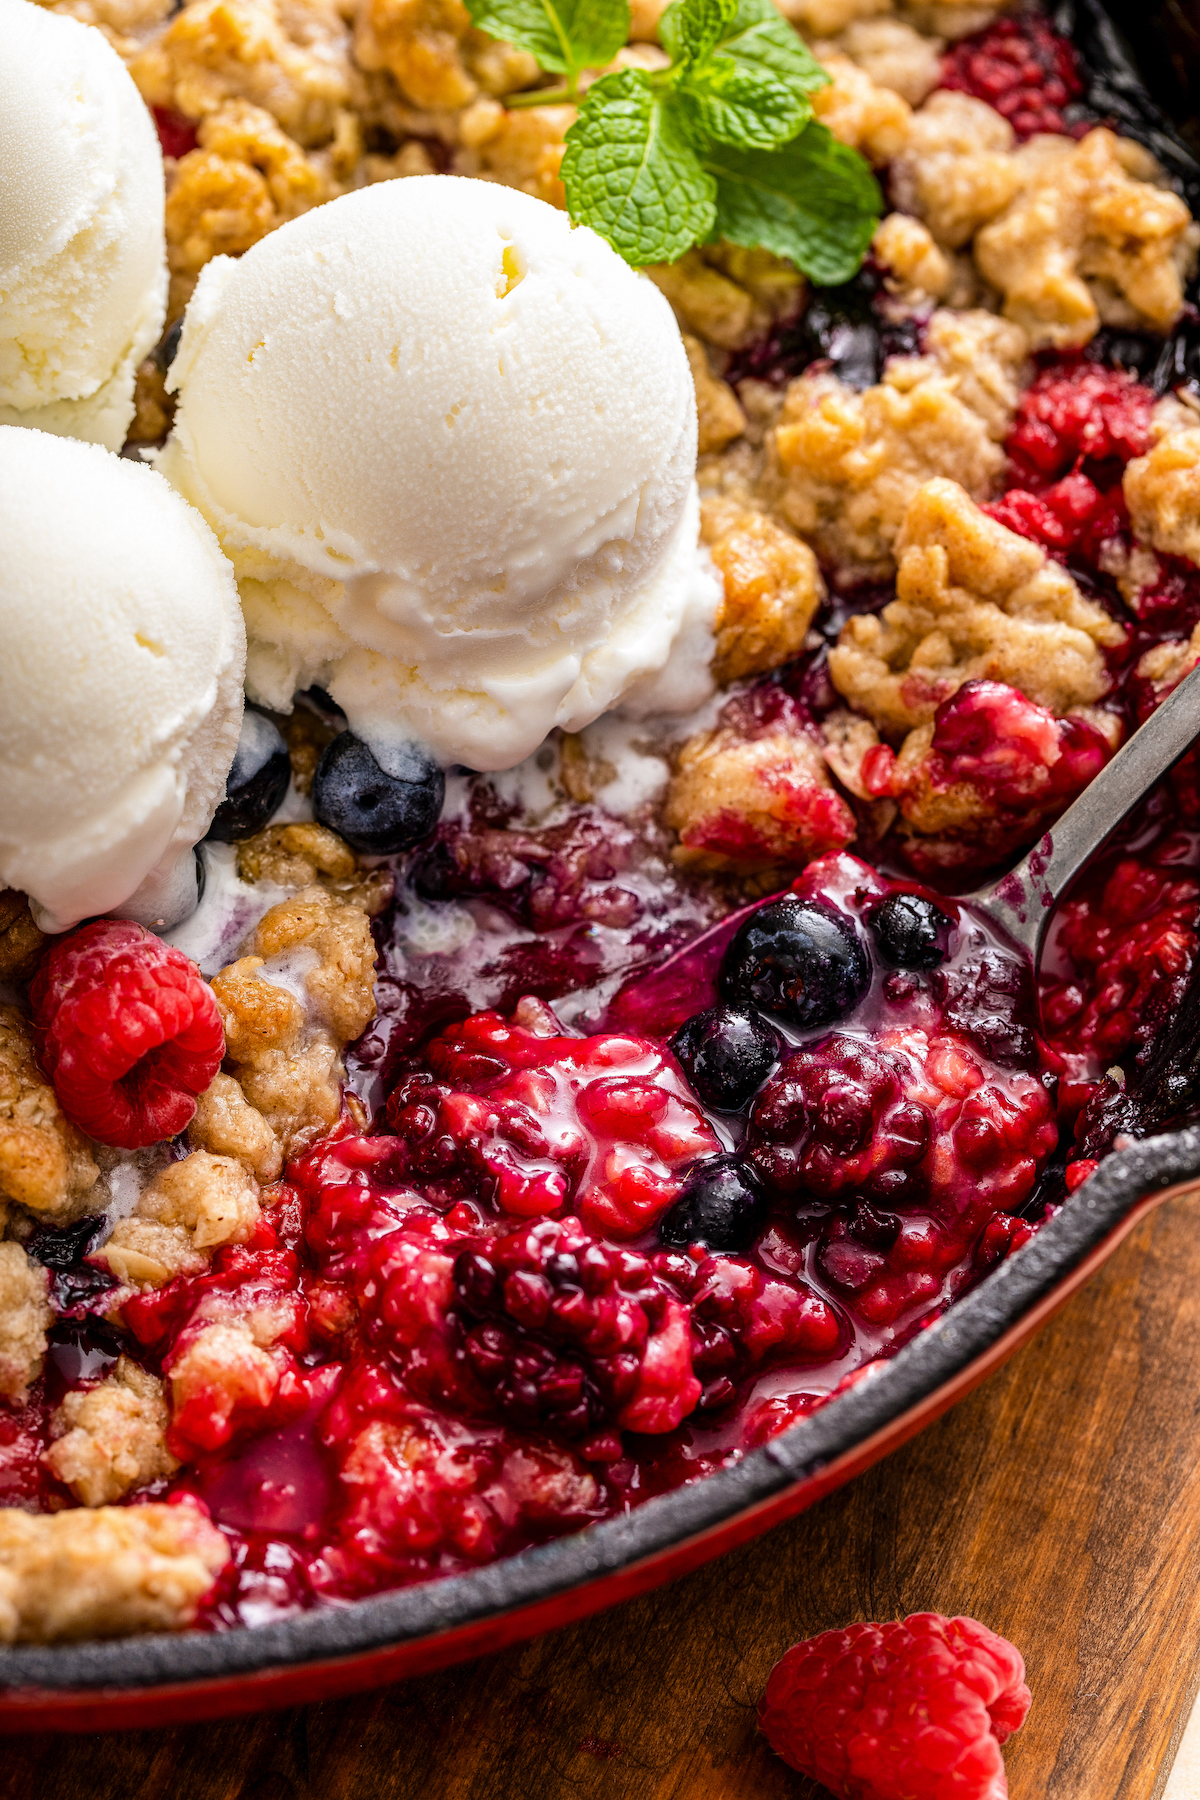 Digging into the berry cobbler with a spoon.